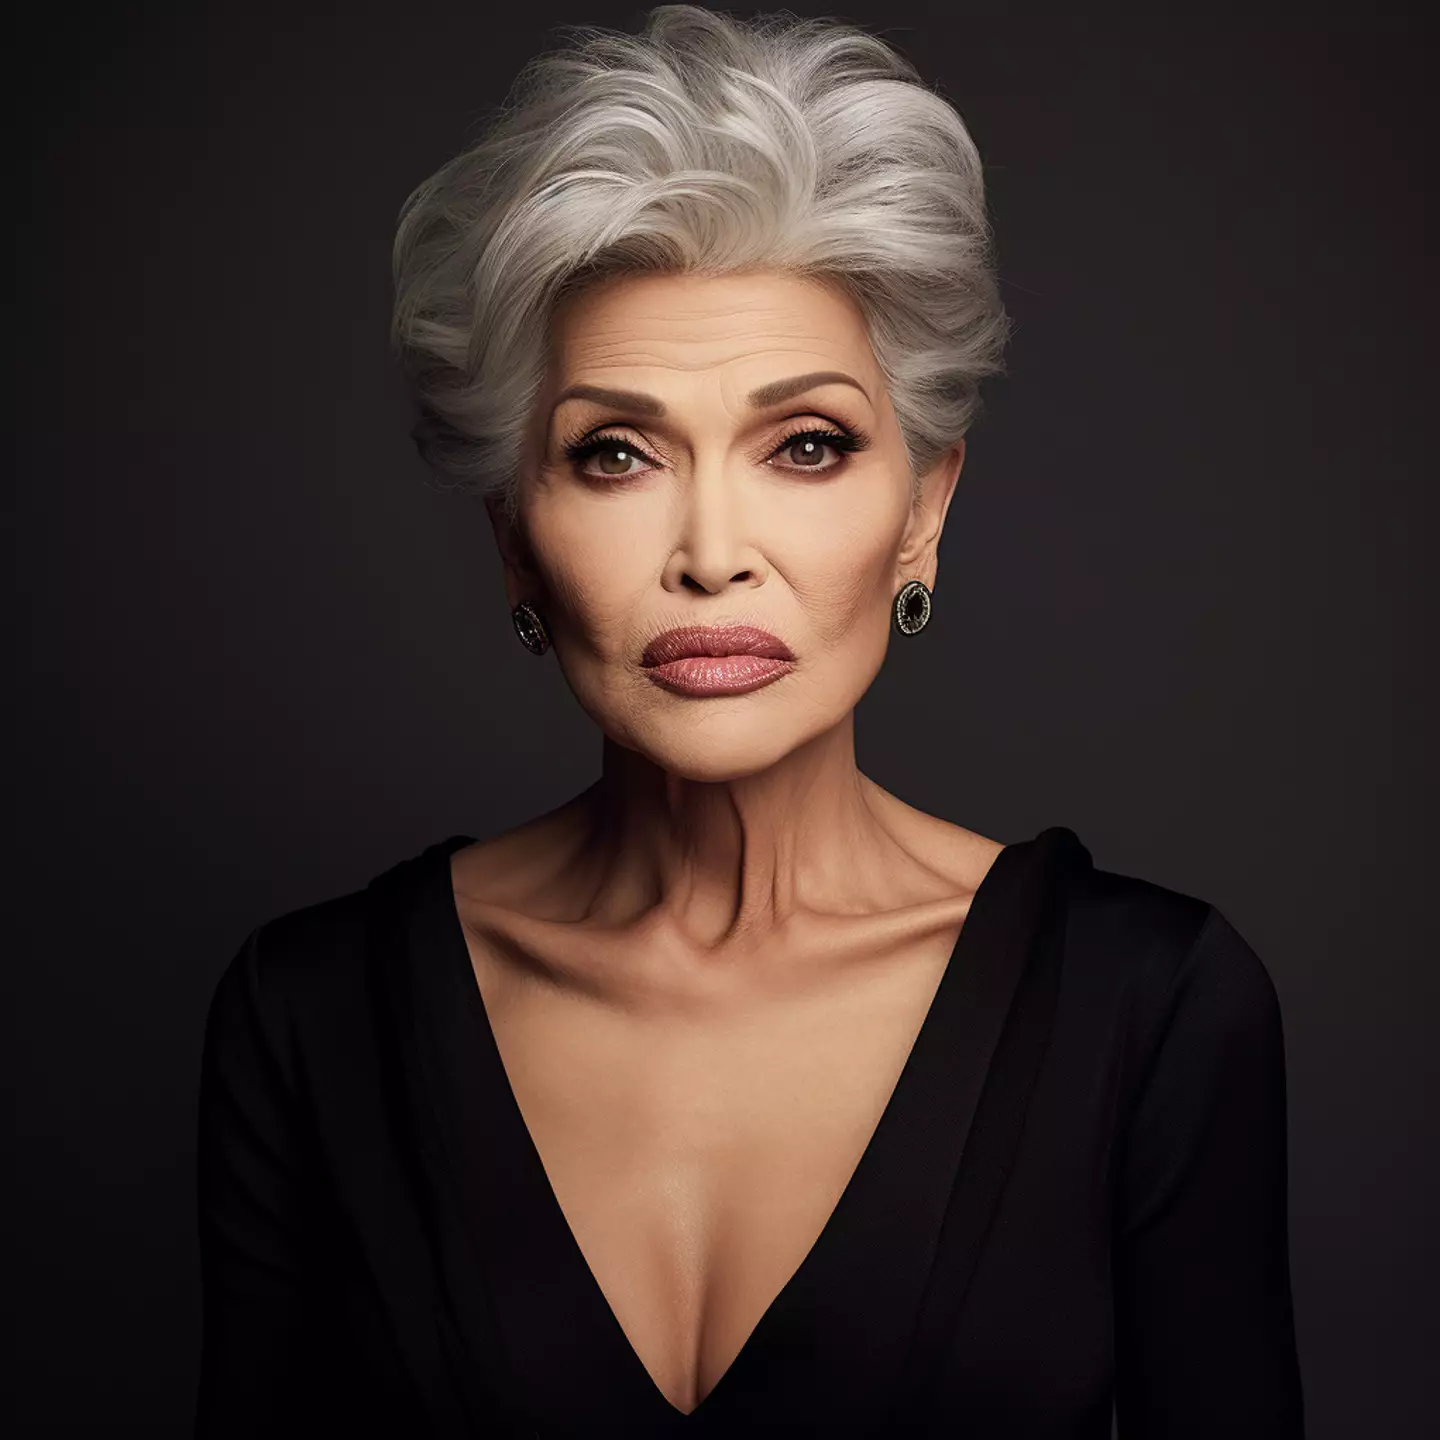 AI's older Kylie Jenner is giving serious Sharon Osbourne vibes.